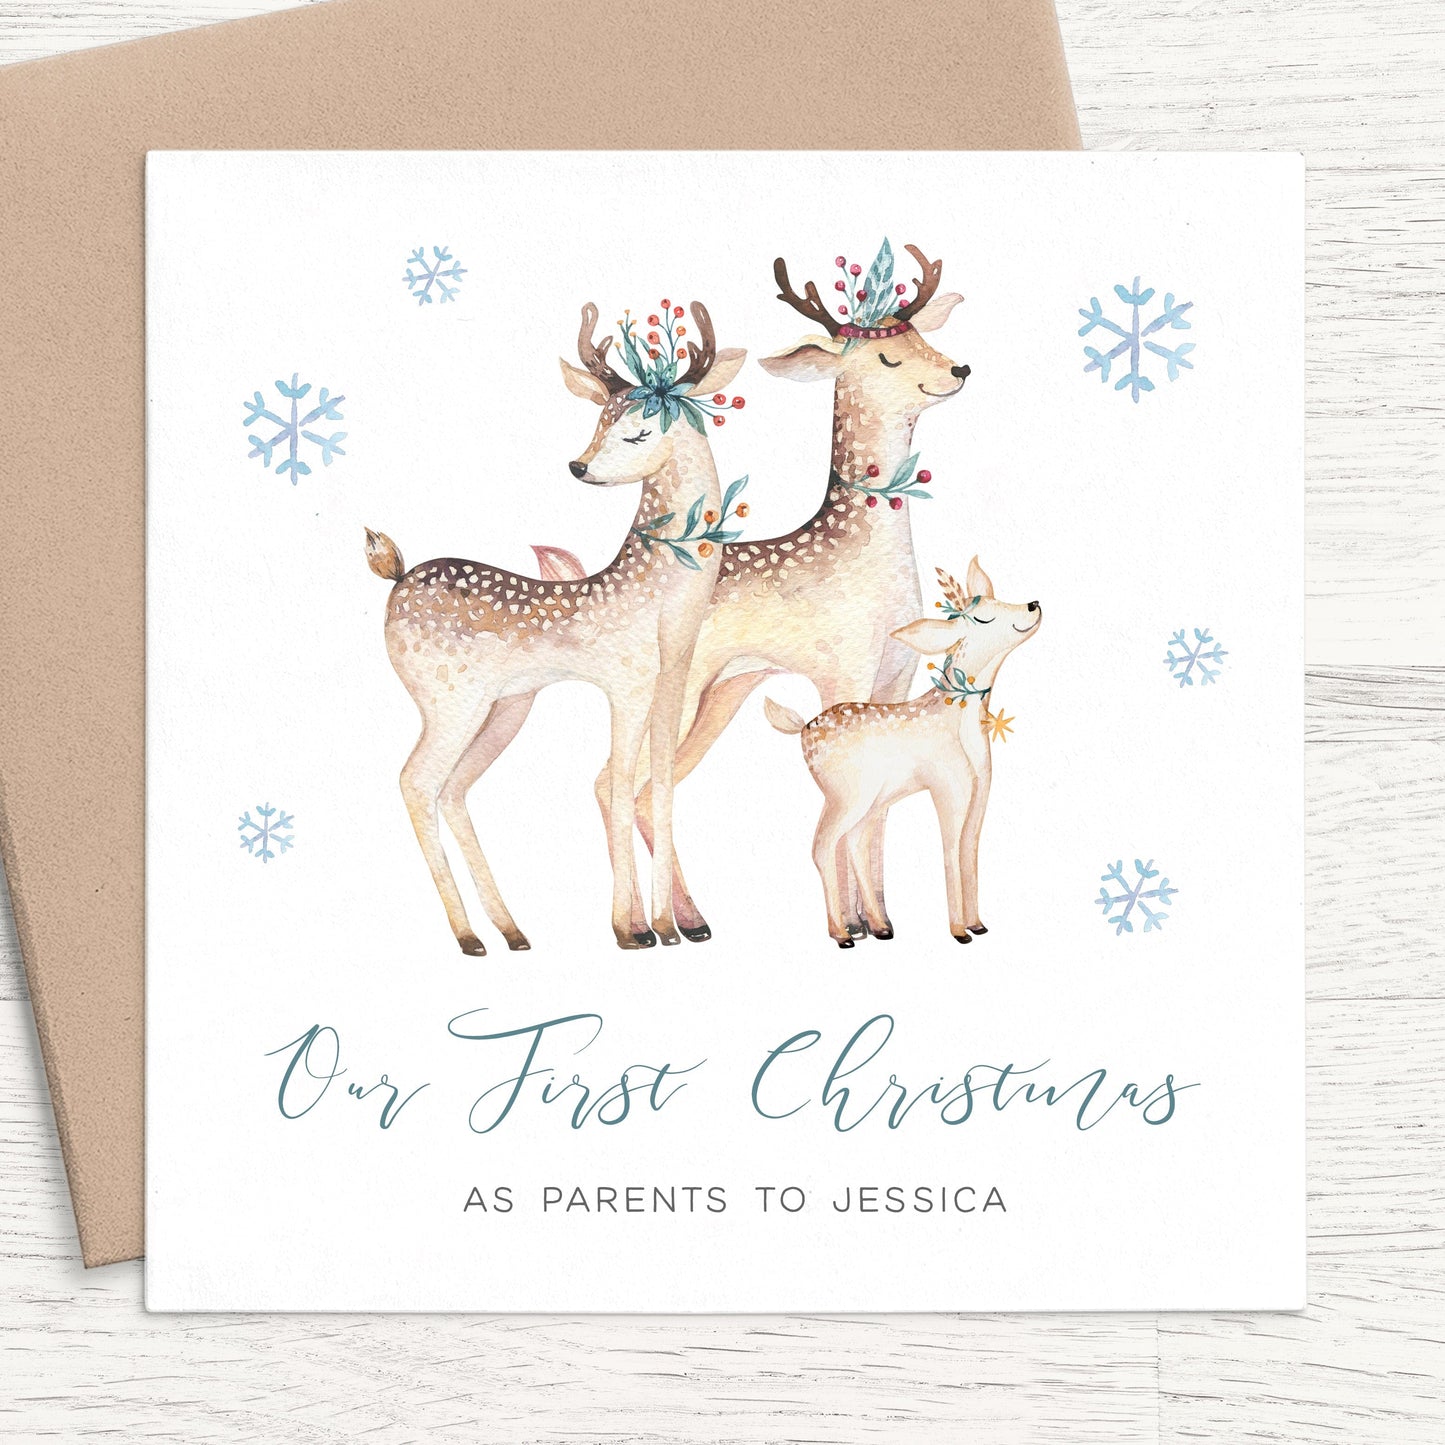 our first christmas as parents card reindeer personalised for husband wife matte white cardstock kraft brown envelope